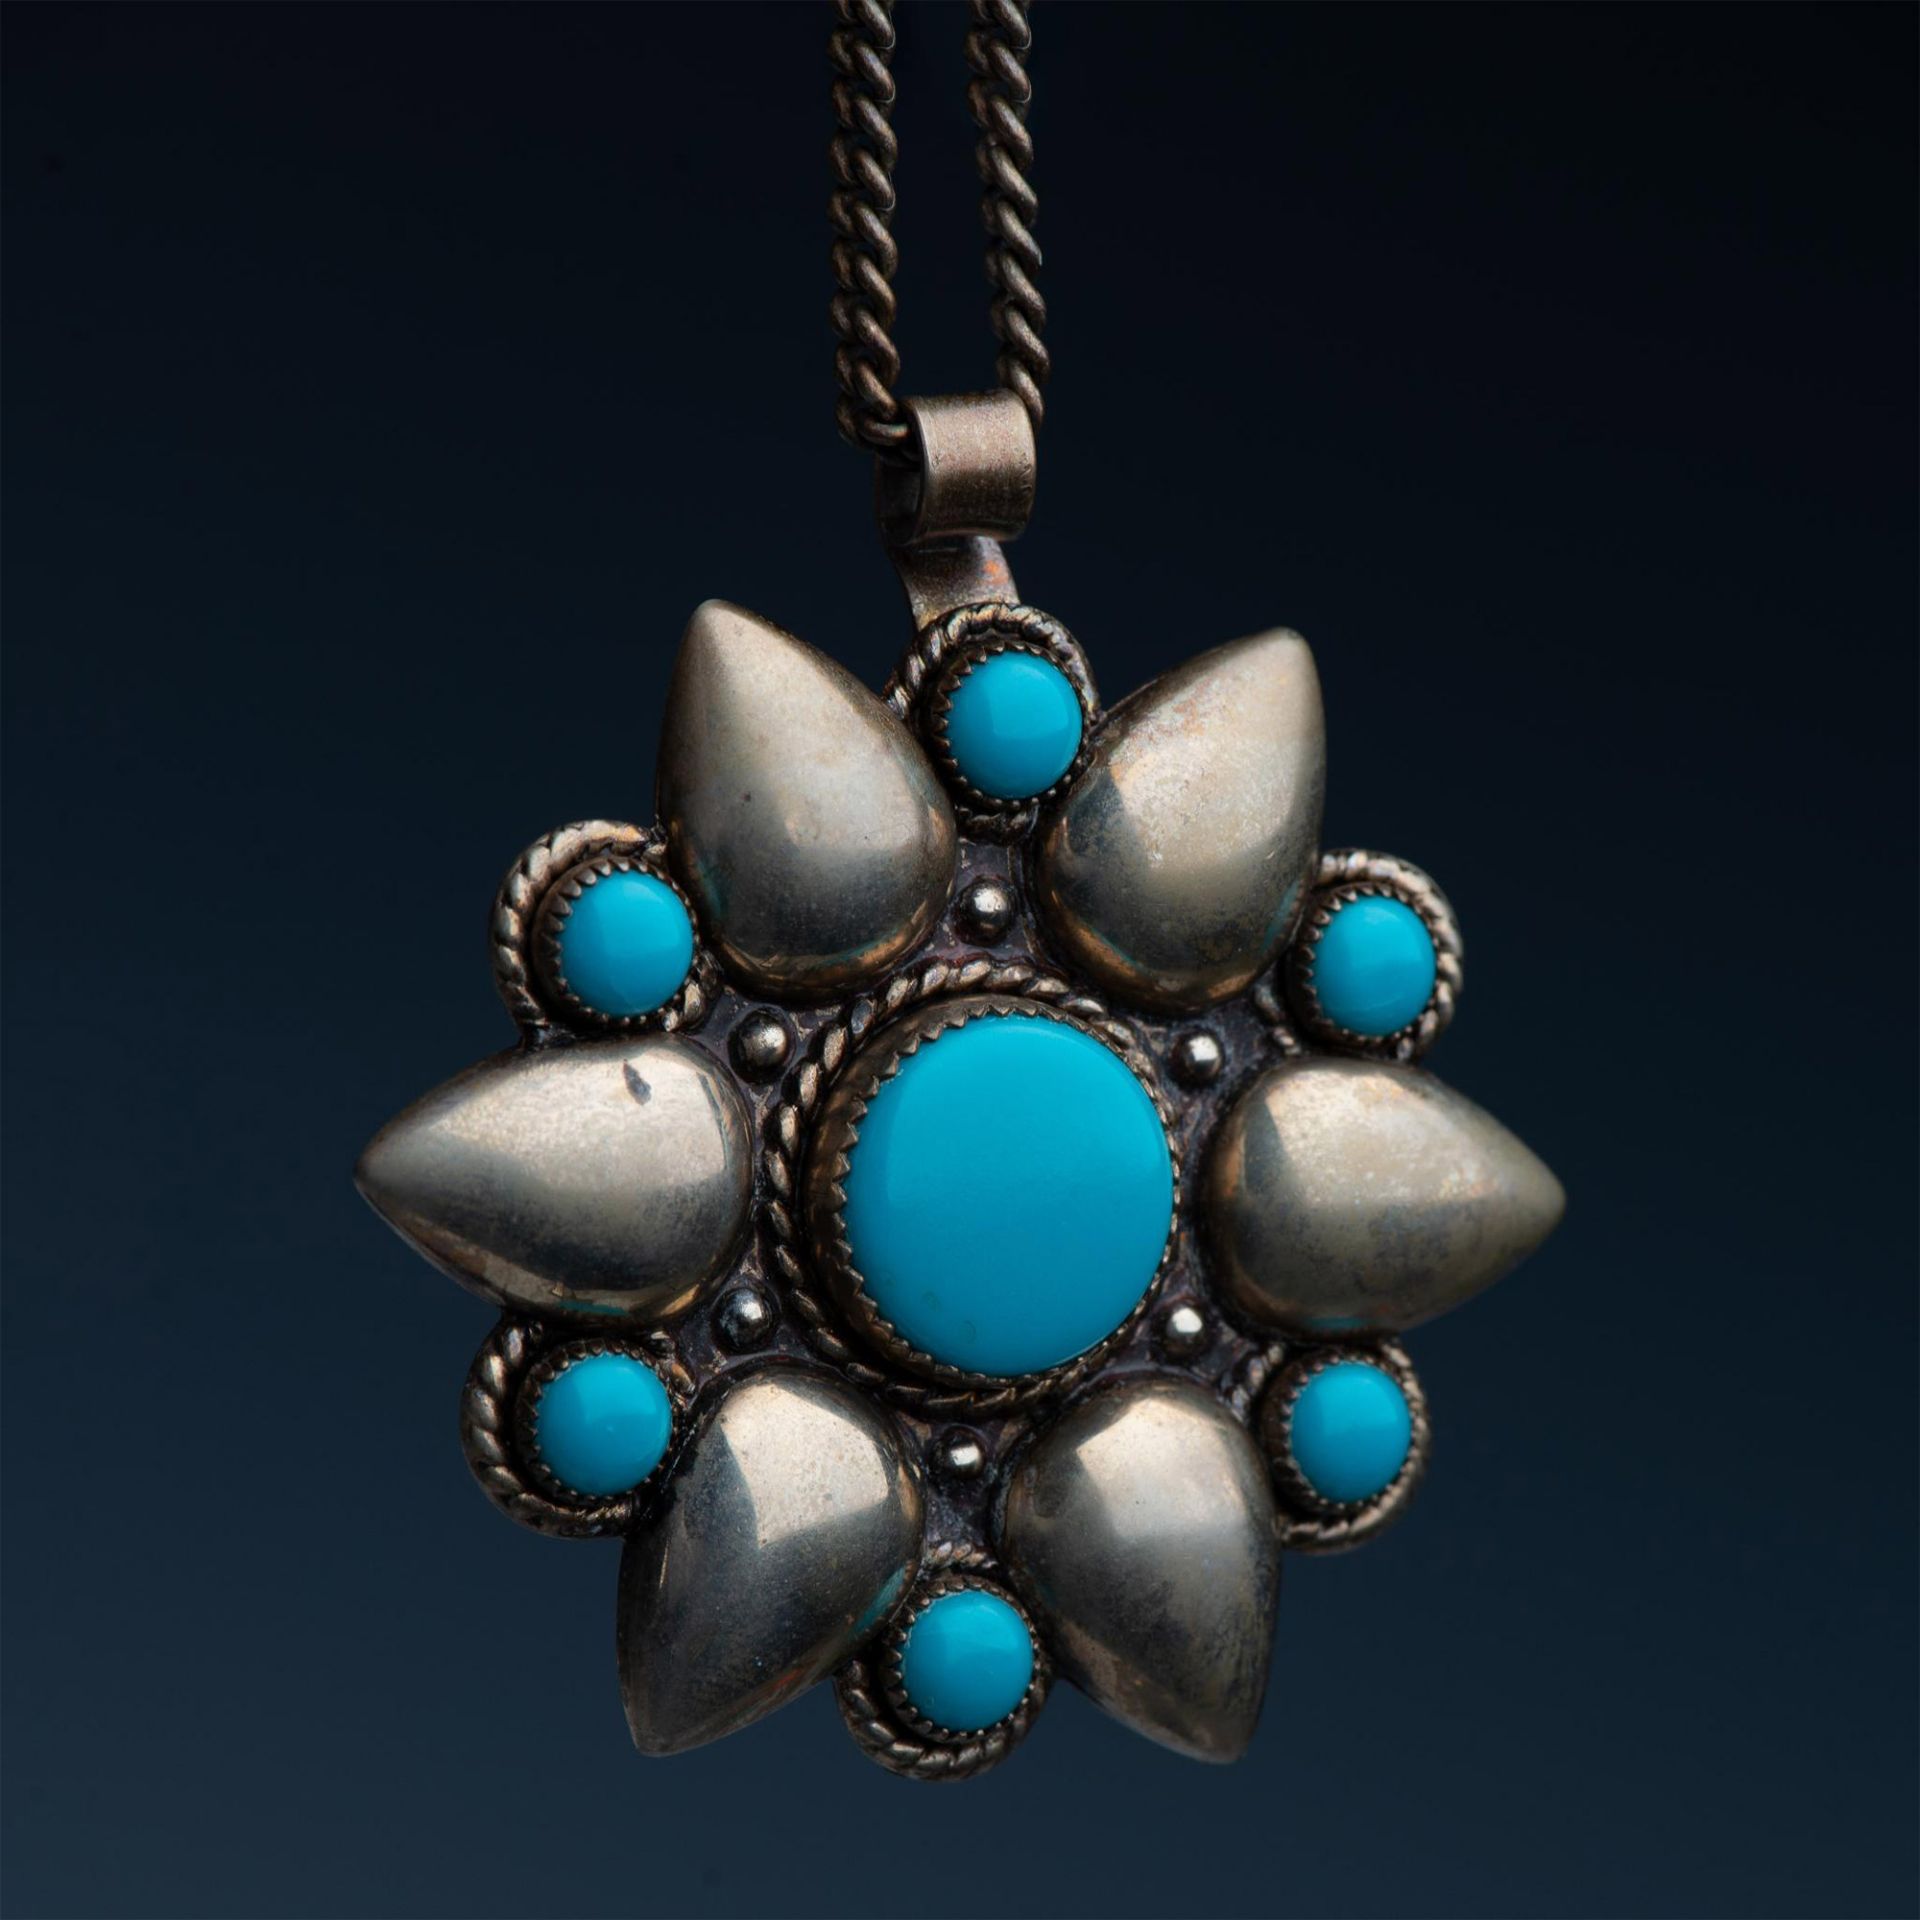 Native American Silver Nickel Faux Turquoise Floral Necklace - Image 4 of 4